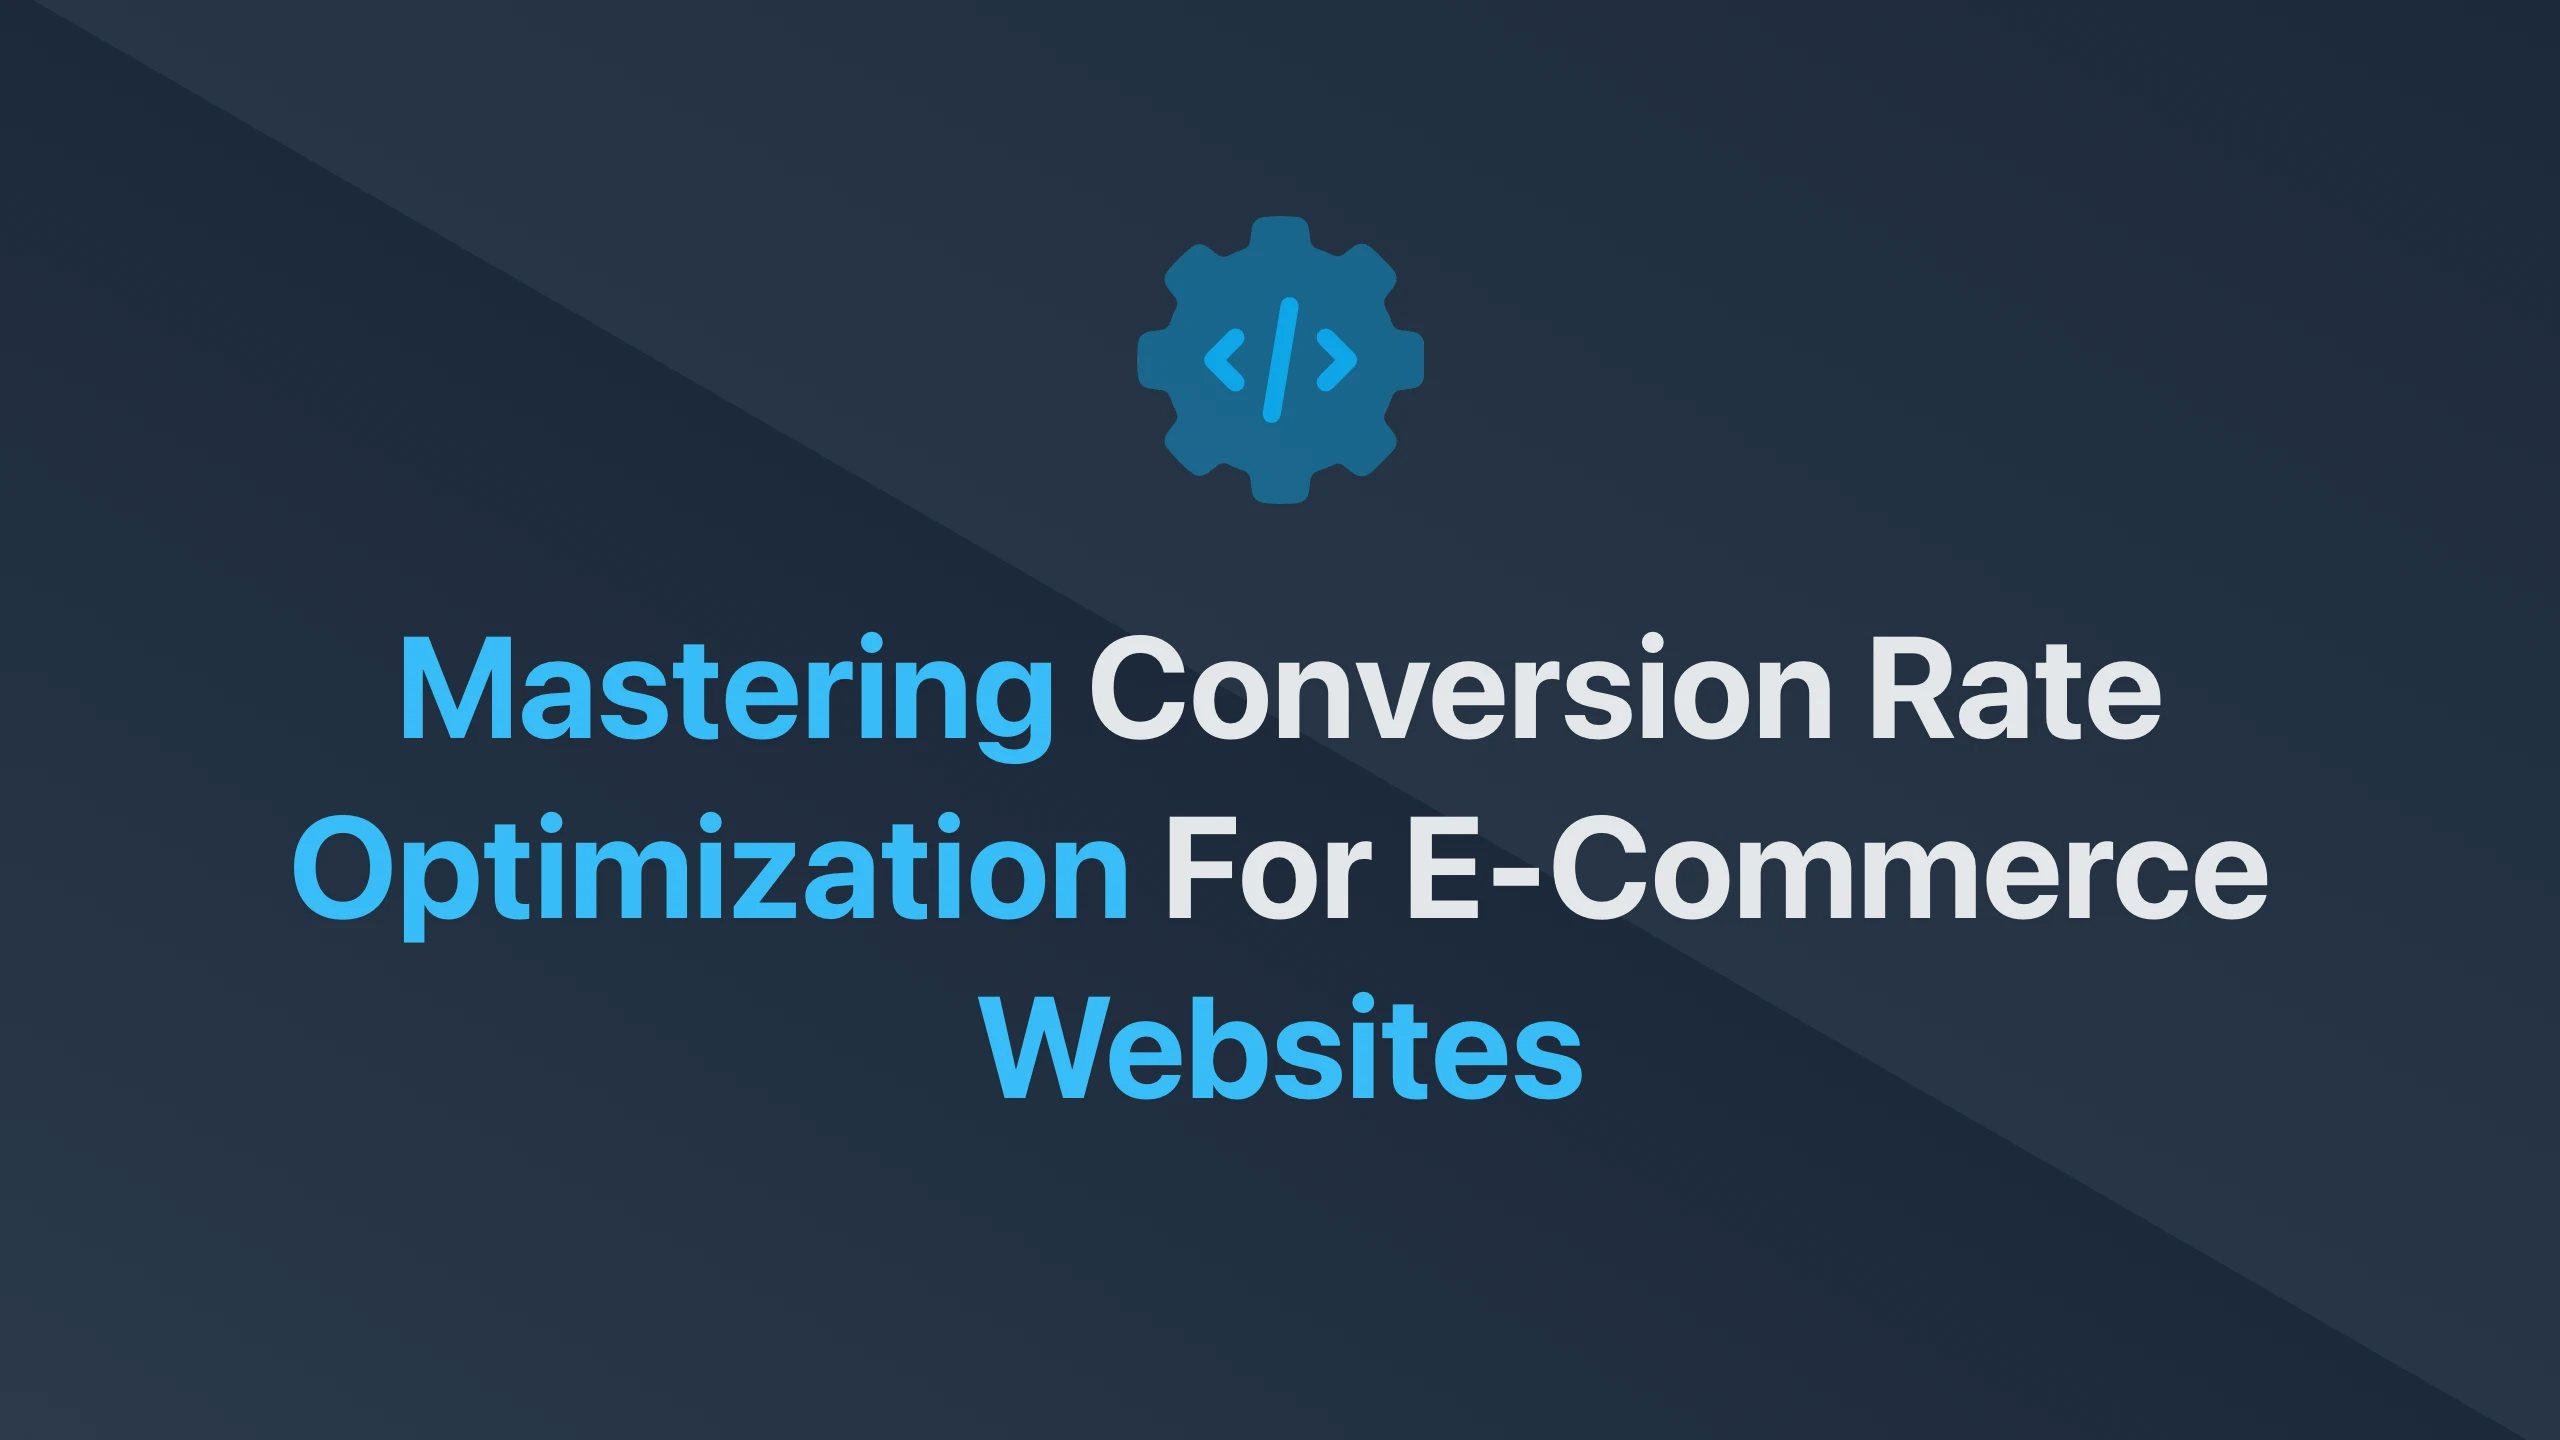 Cover Image for Mastering Conversion Rate Optimization for E-Commerce Websites